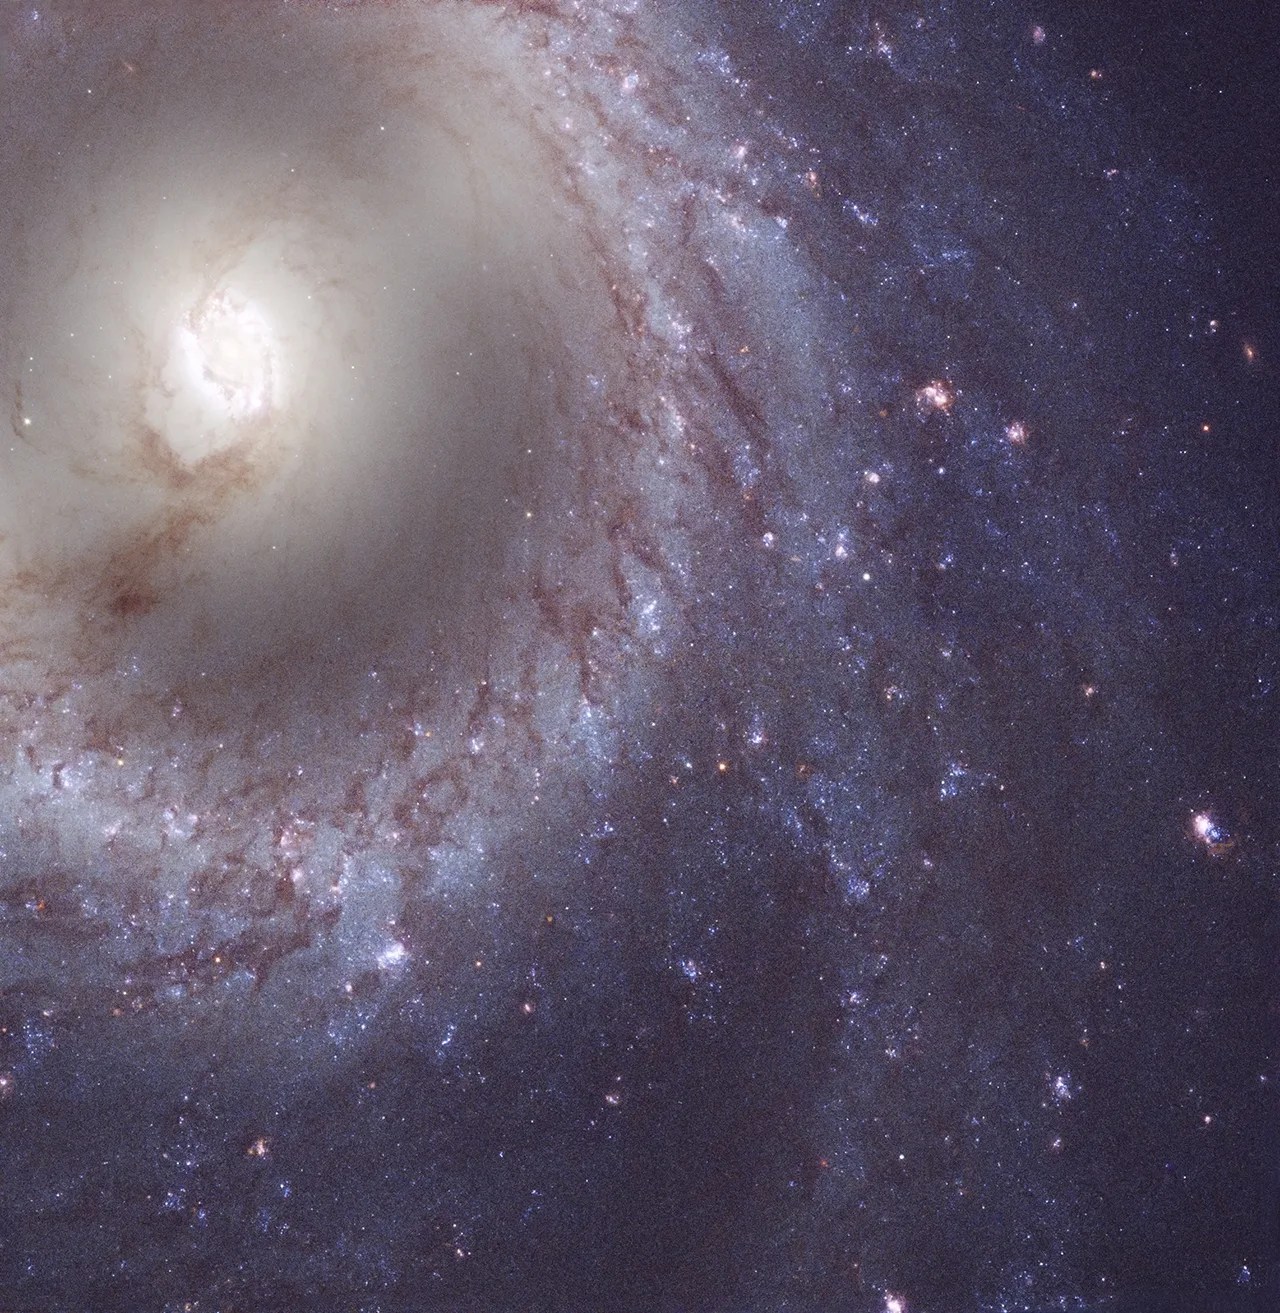 Near the top left, a bright galaxy core shines, surrounded by spiral arms with dark dust and purple-white regions of star formation.